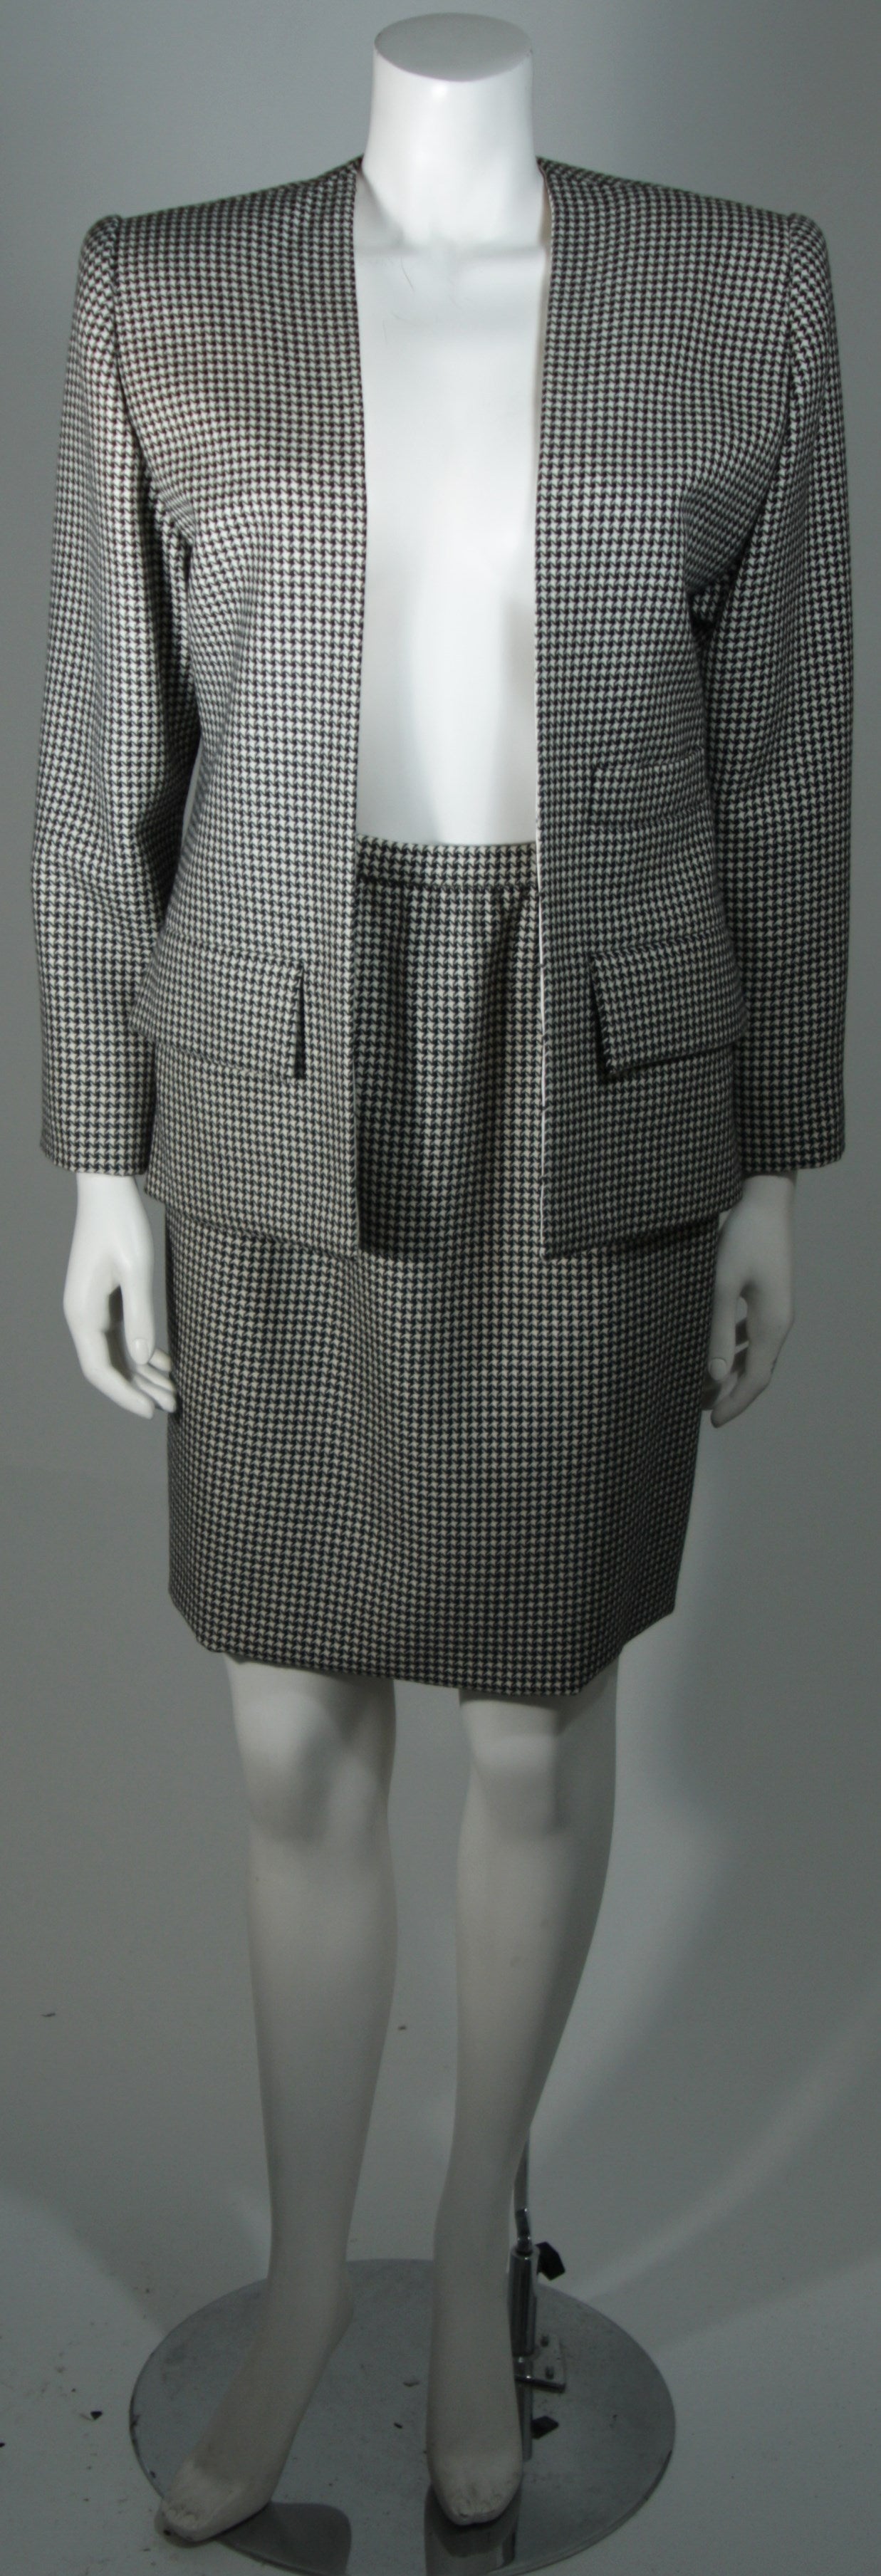 This Galanos Couture design is available for viewing at our Beverly Hills Boutique. We offer a large selection of evening gowns and luxury garments.

This suit is composed of a houndstooth patterned wool in black and white. The open style jacket